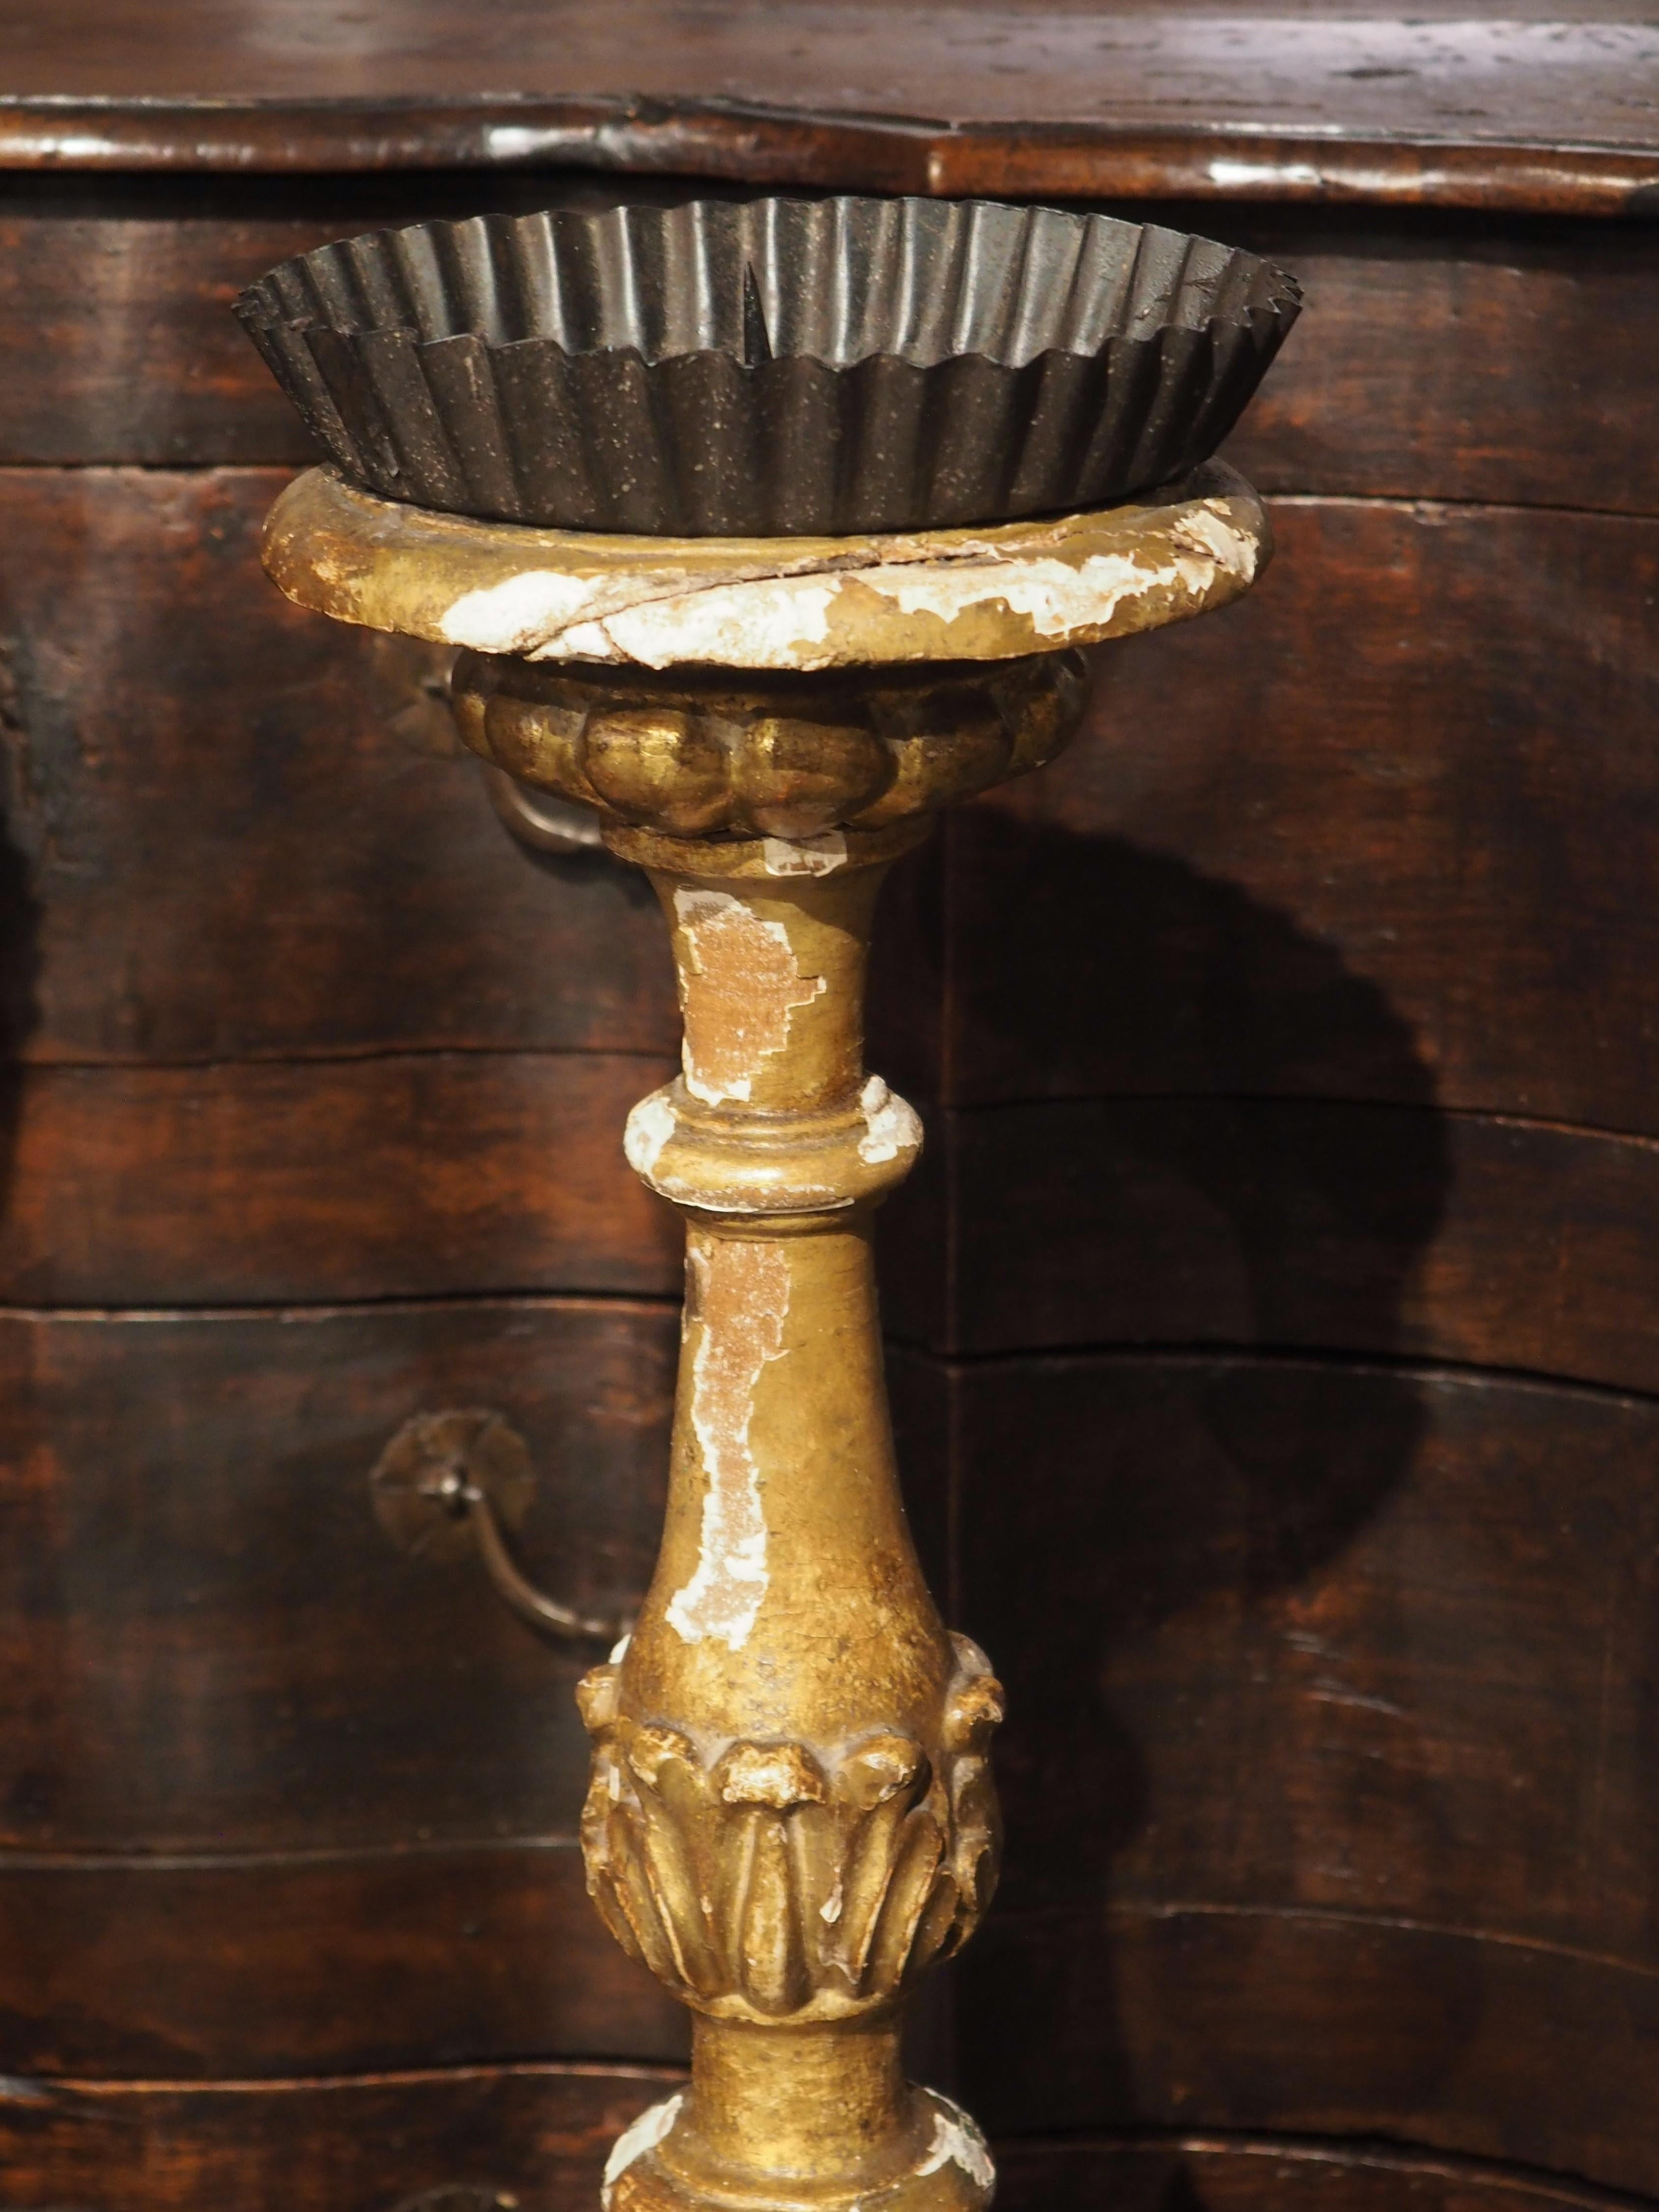 Hand-carved in France in the 1700’s, this pair of giltwood altar candlesticks has been adorned with foliate motifs and stylized paw feet. The finely detailed columns stand on tripartite bases and were completely carved on all sides.

The columns